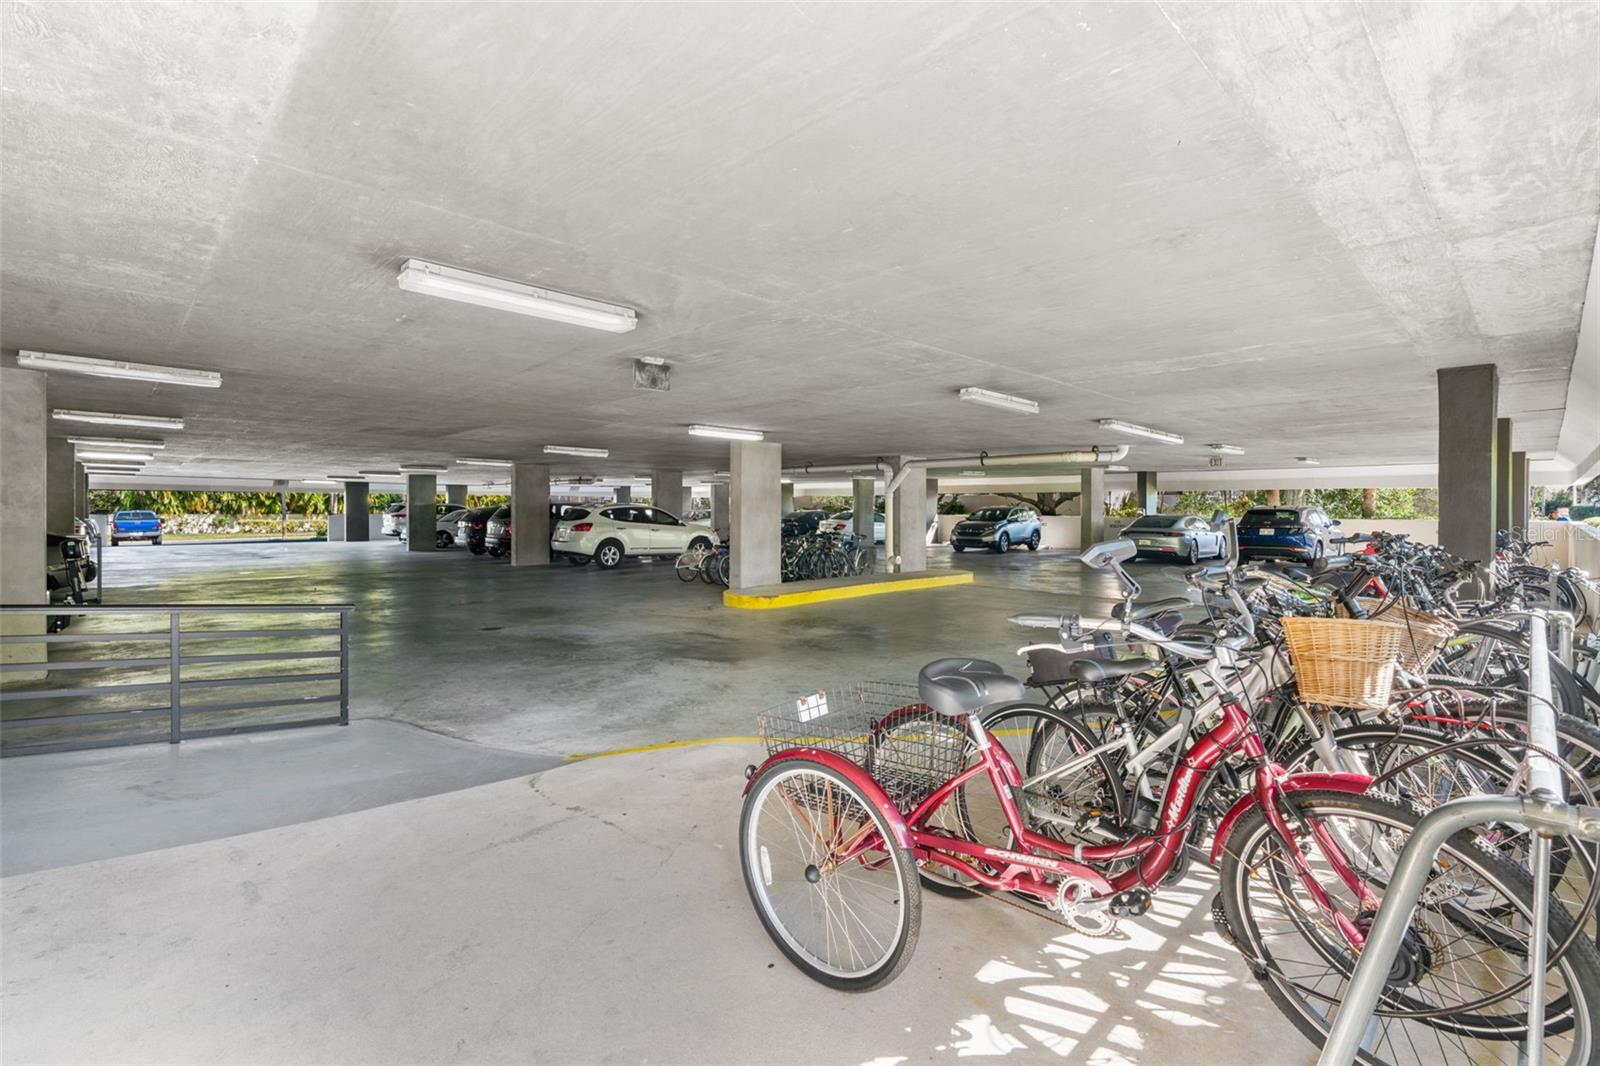 Savor the exclusivity of this condo with its deeded assigned covered parking space, ample guest parking, and a designated spot for your bike.